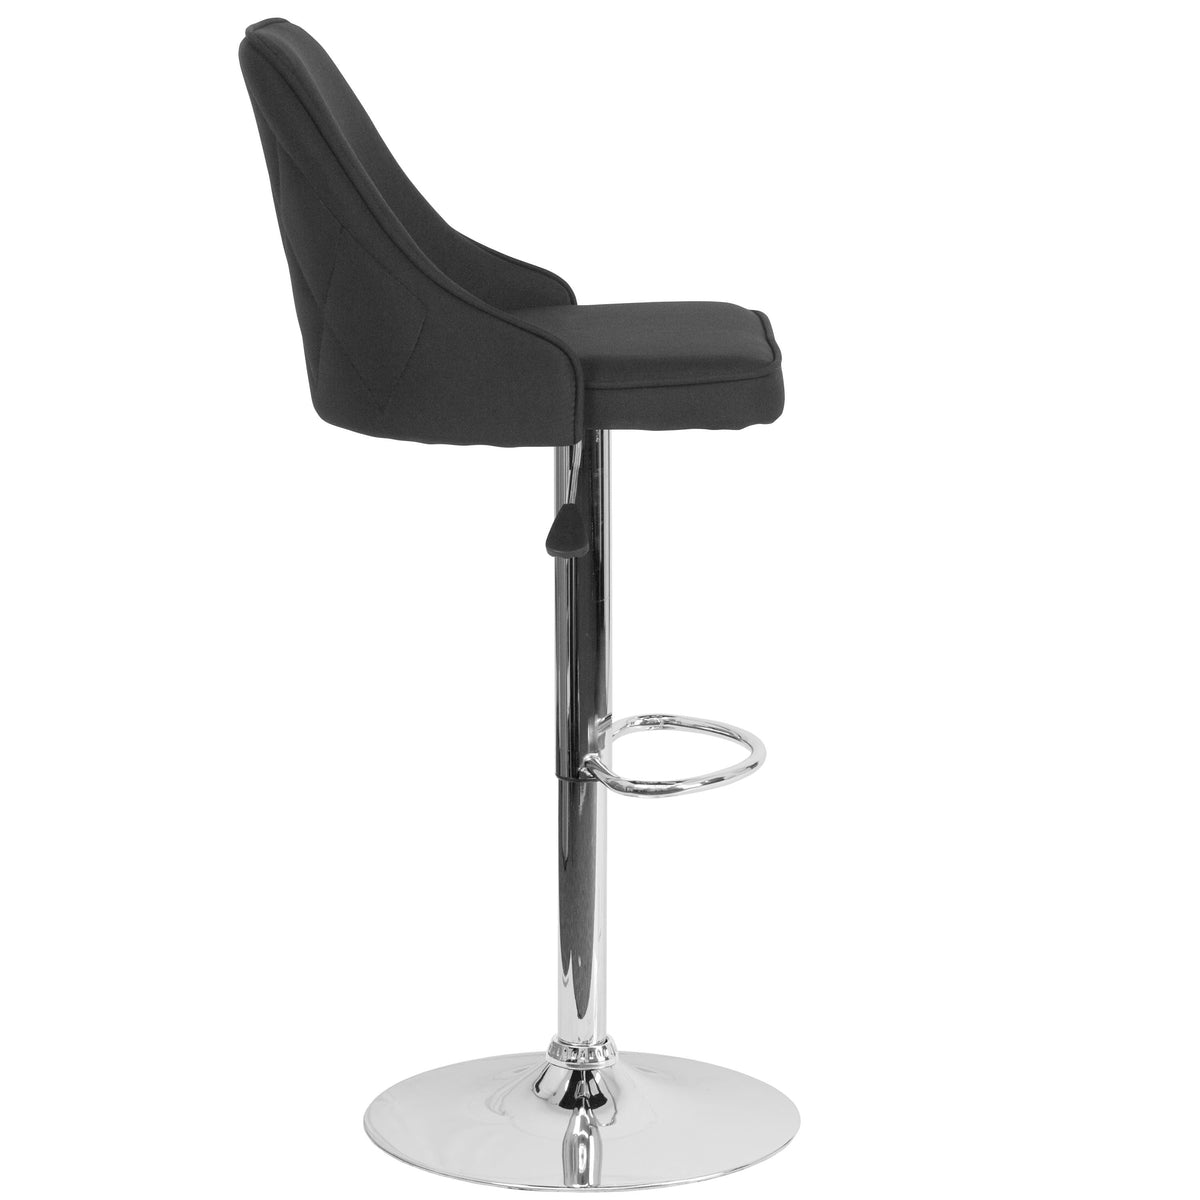 Black Fabric |#| Contemporary Adjustable Height Barstool in Black Fabric - Kitchen Furniture